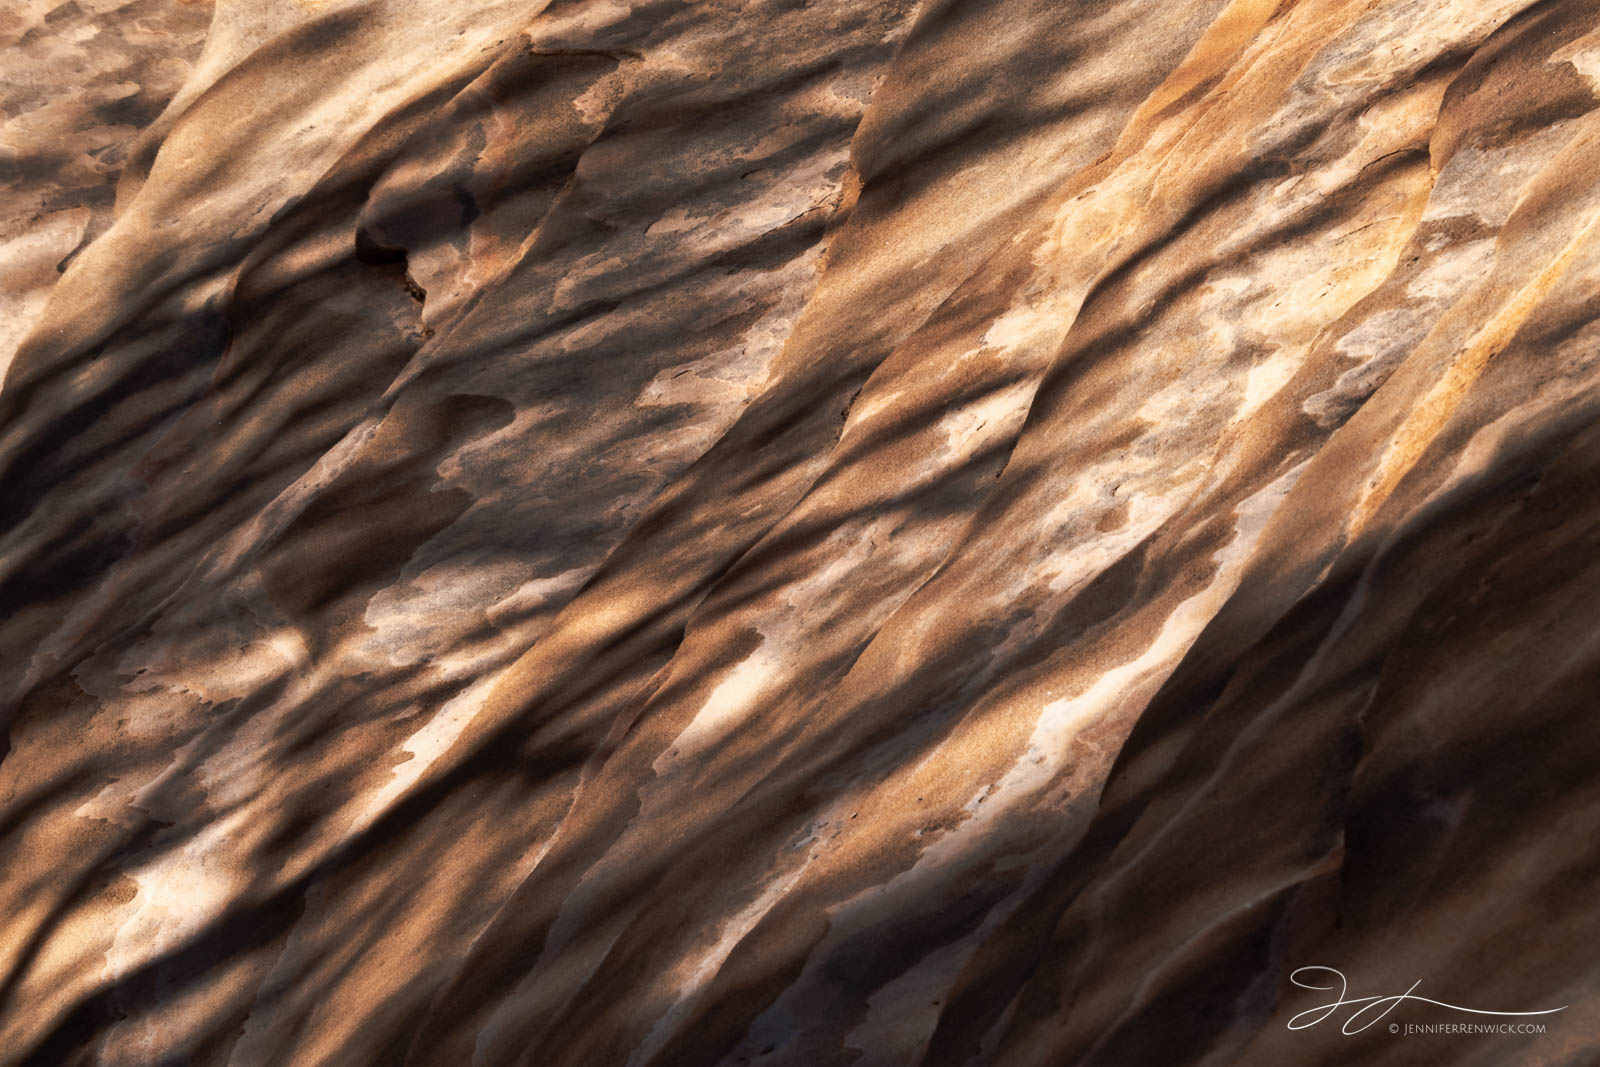 Light and shadow through tree branches cast interesting patterns on a sandstone rock face.